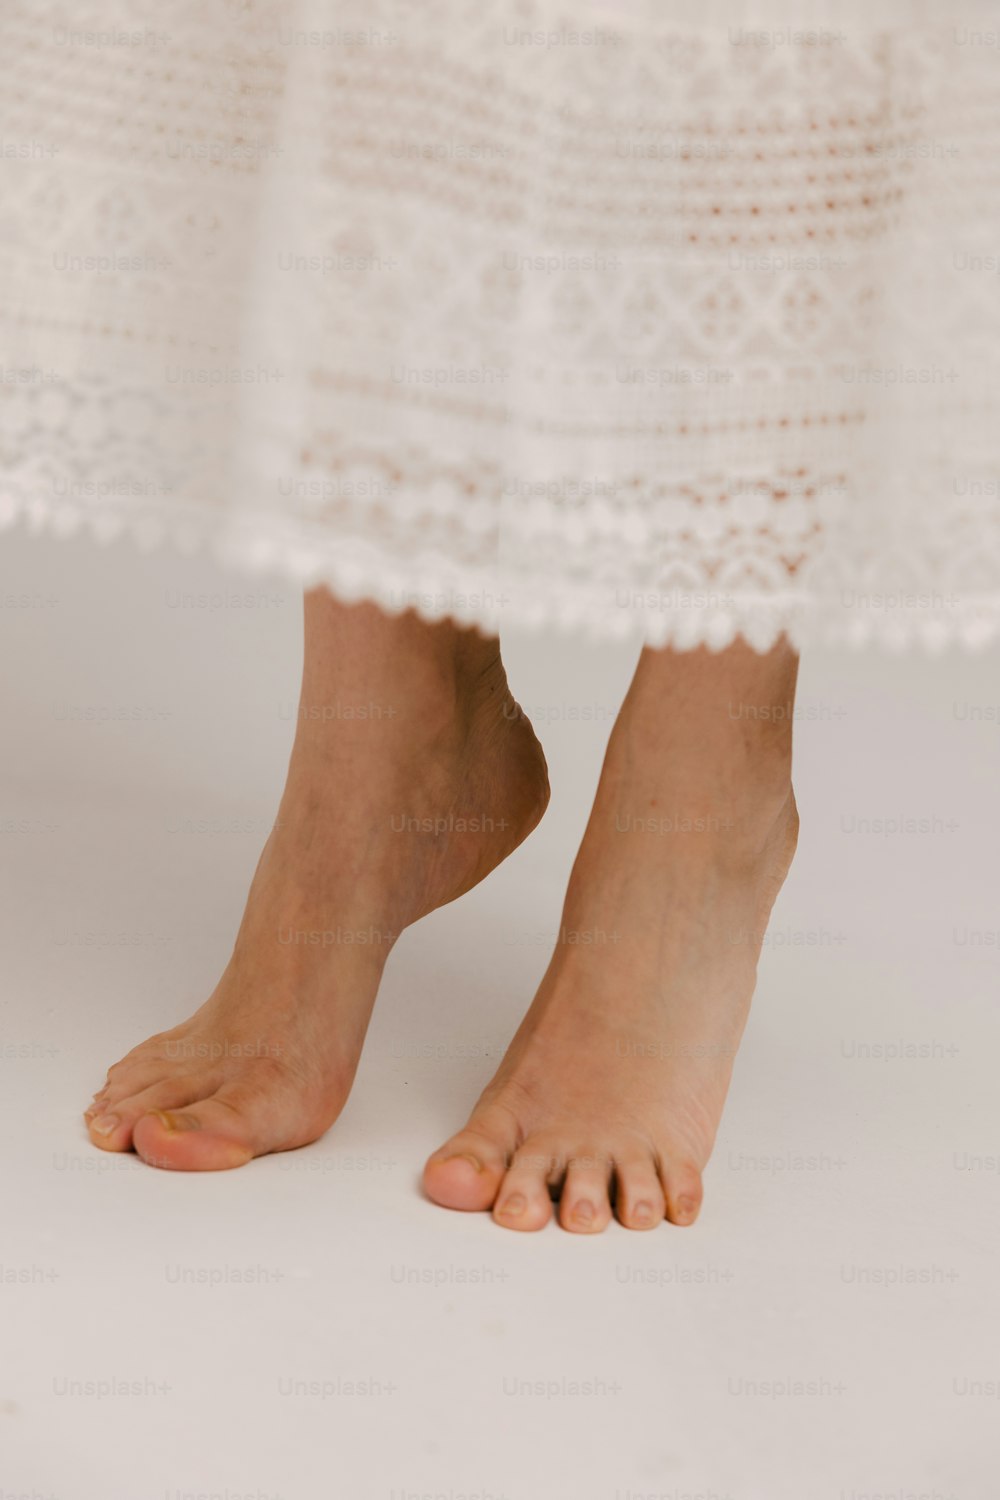 a close up of a person's bare feet wearing a white dress